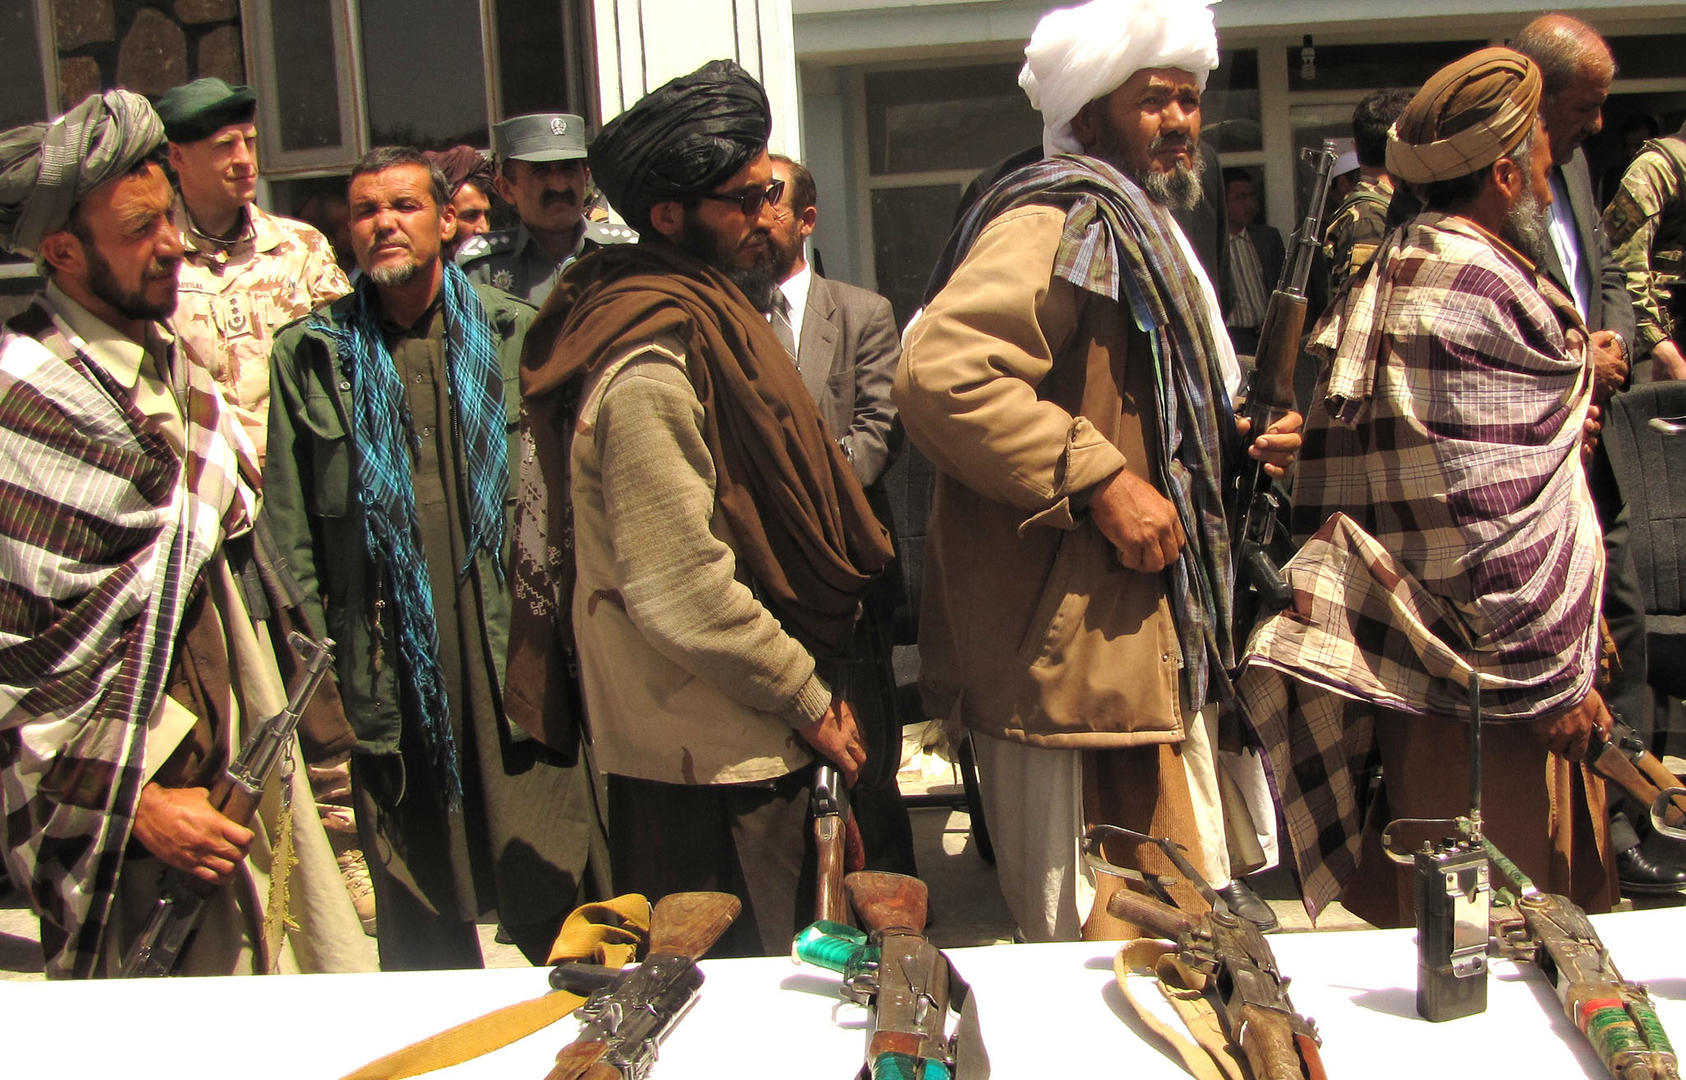 Former Taliban fighters line up to handover their rifles to the Afghan Government during a reintegration ceremony, May 2012. (Department of Defense/Lt. j. g. Joe Painter)